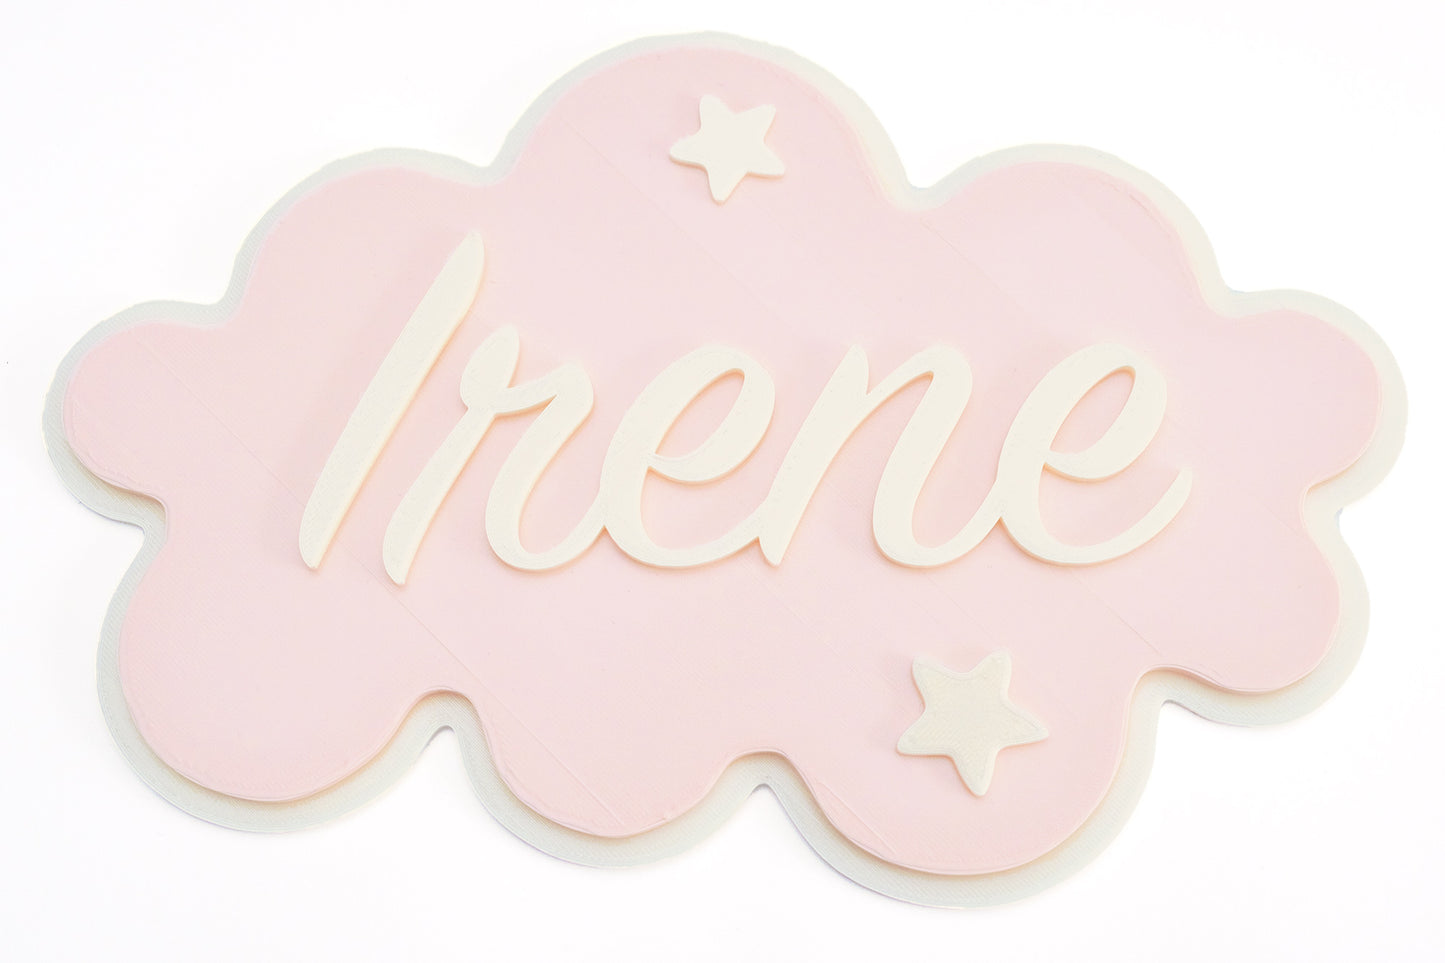 Personalized Cloud plate with name. 23cm.